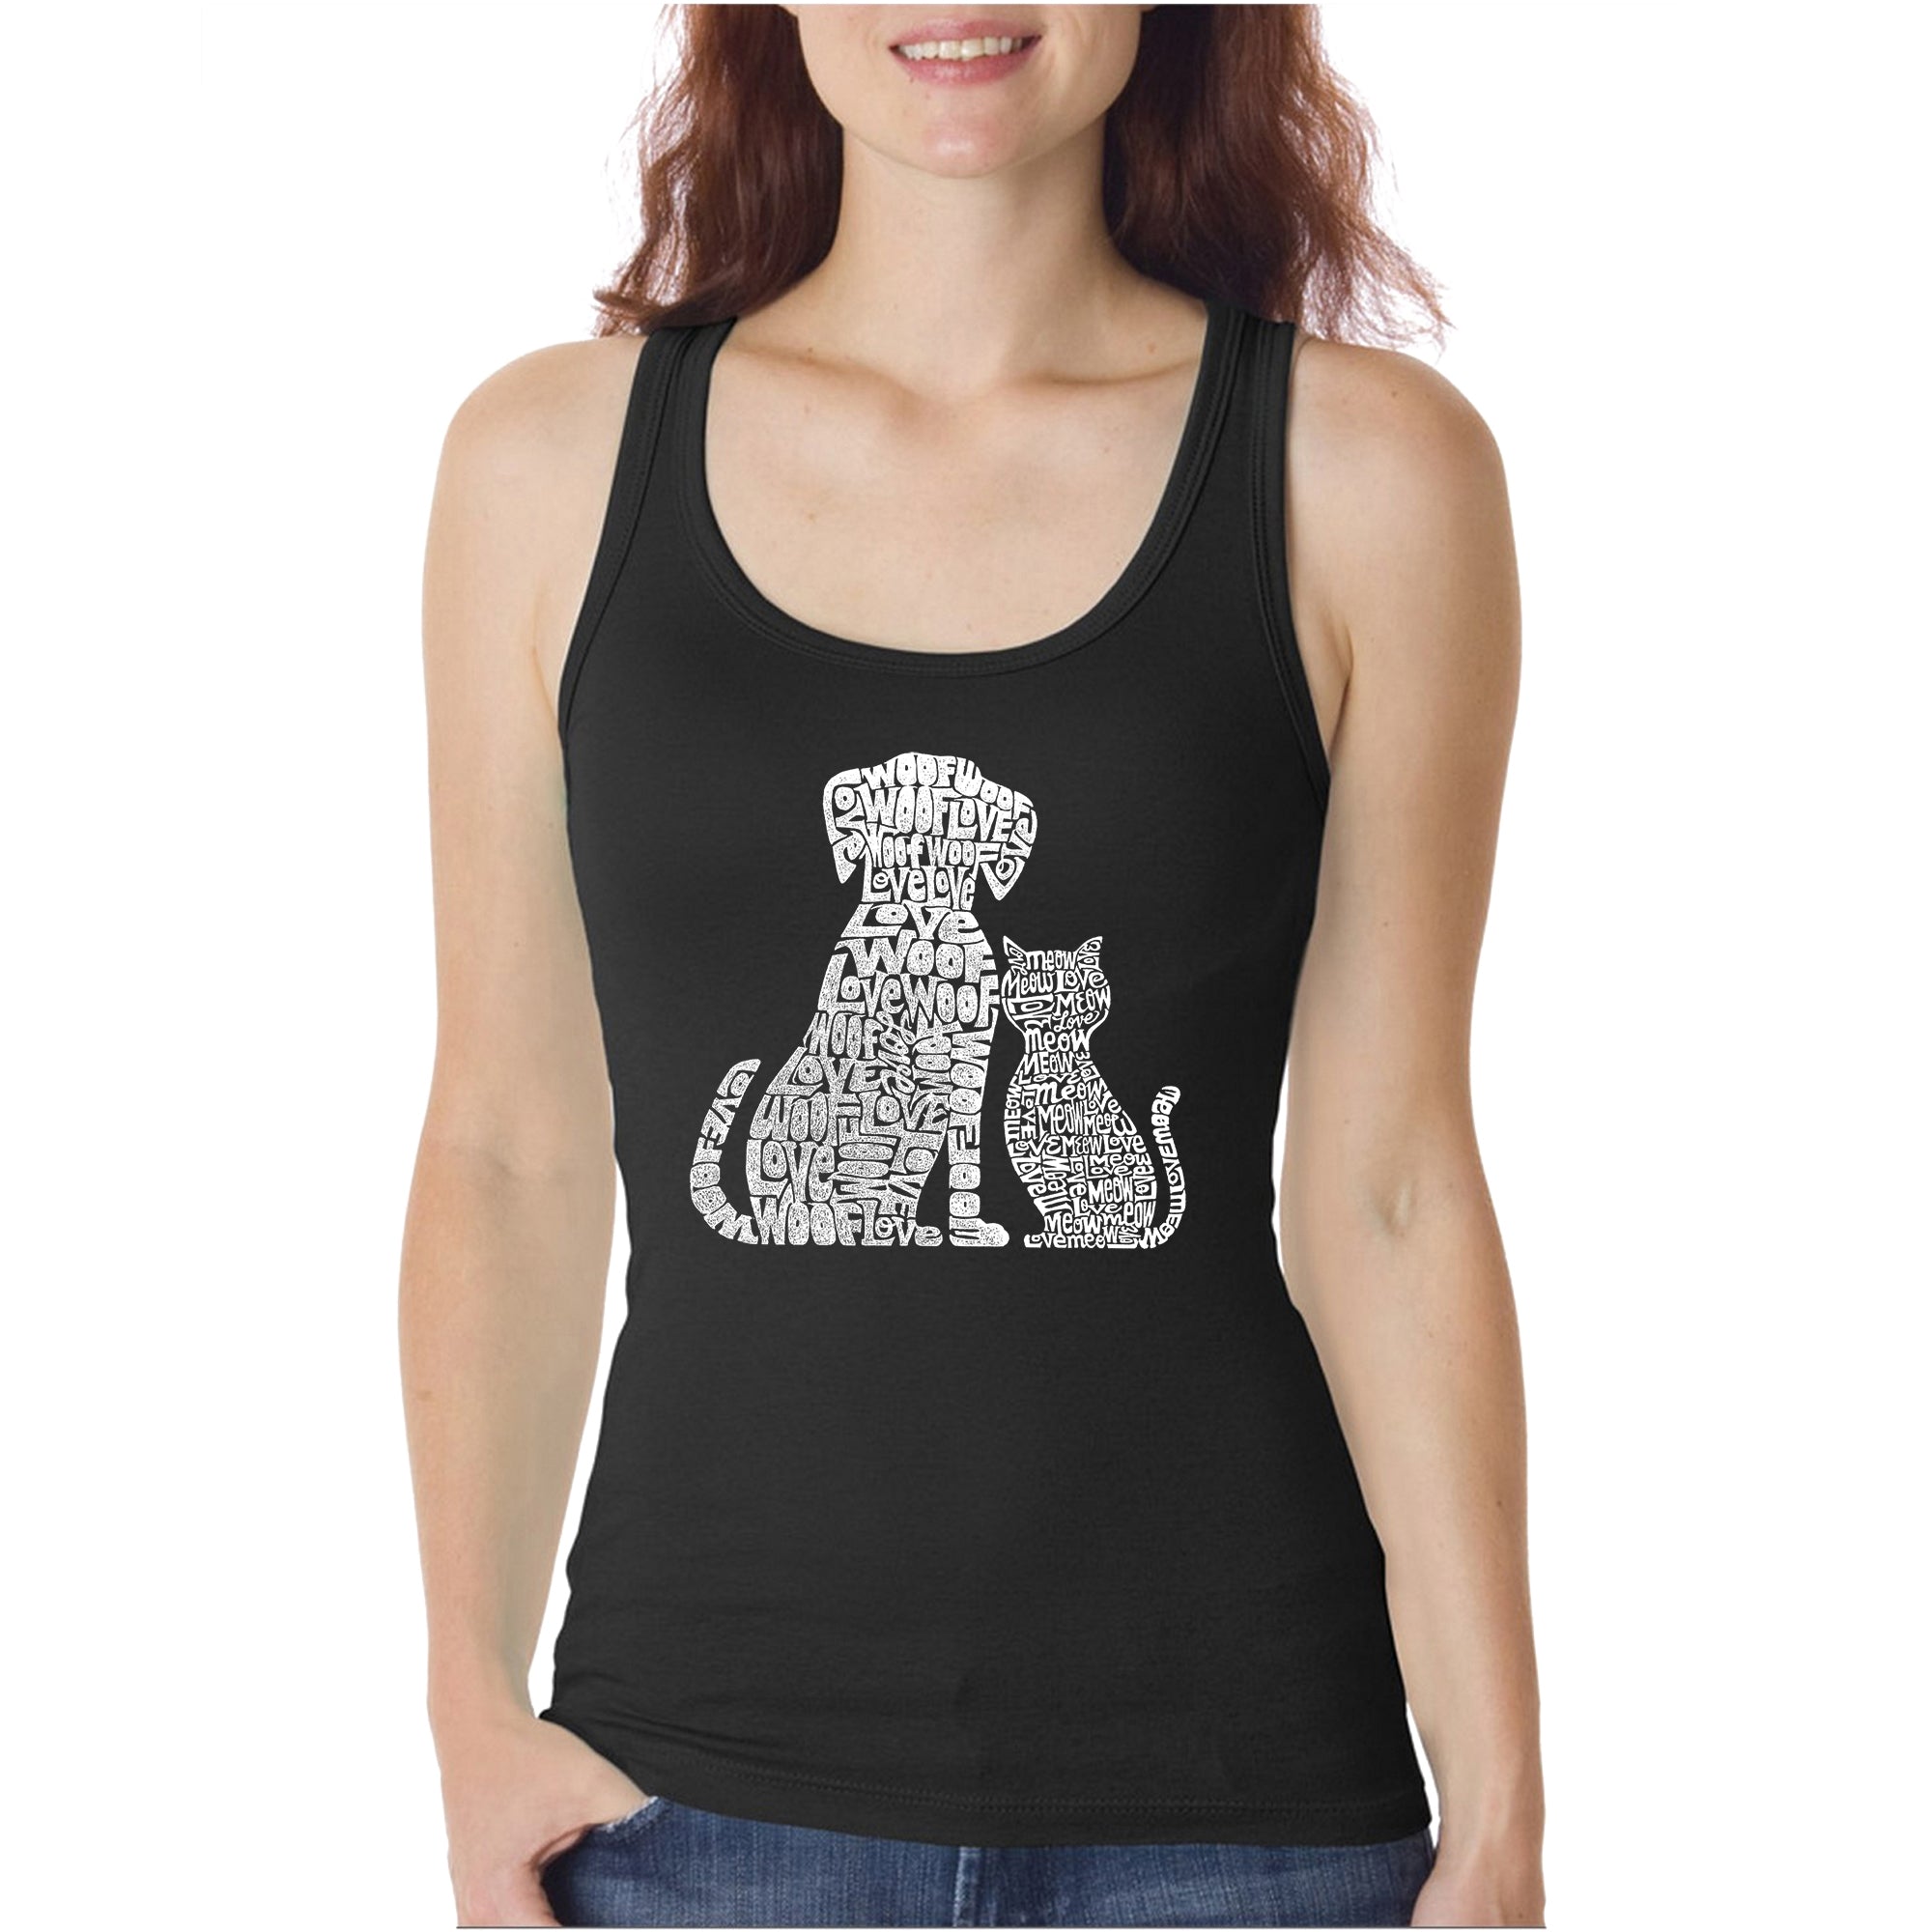 Dogs And Cats - Women's Word Art Tank Top - X-Large